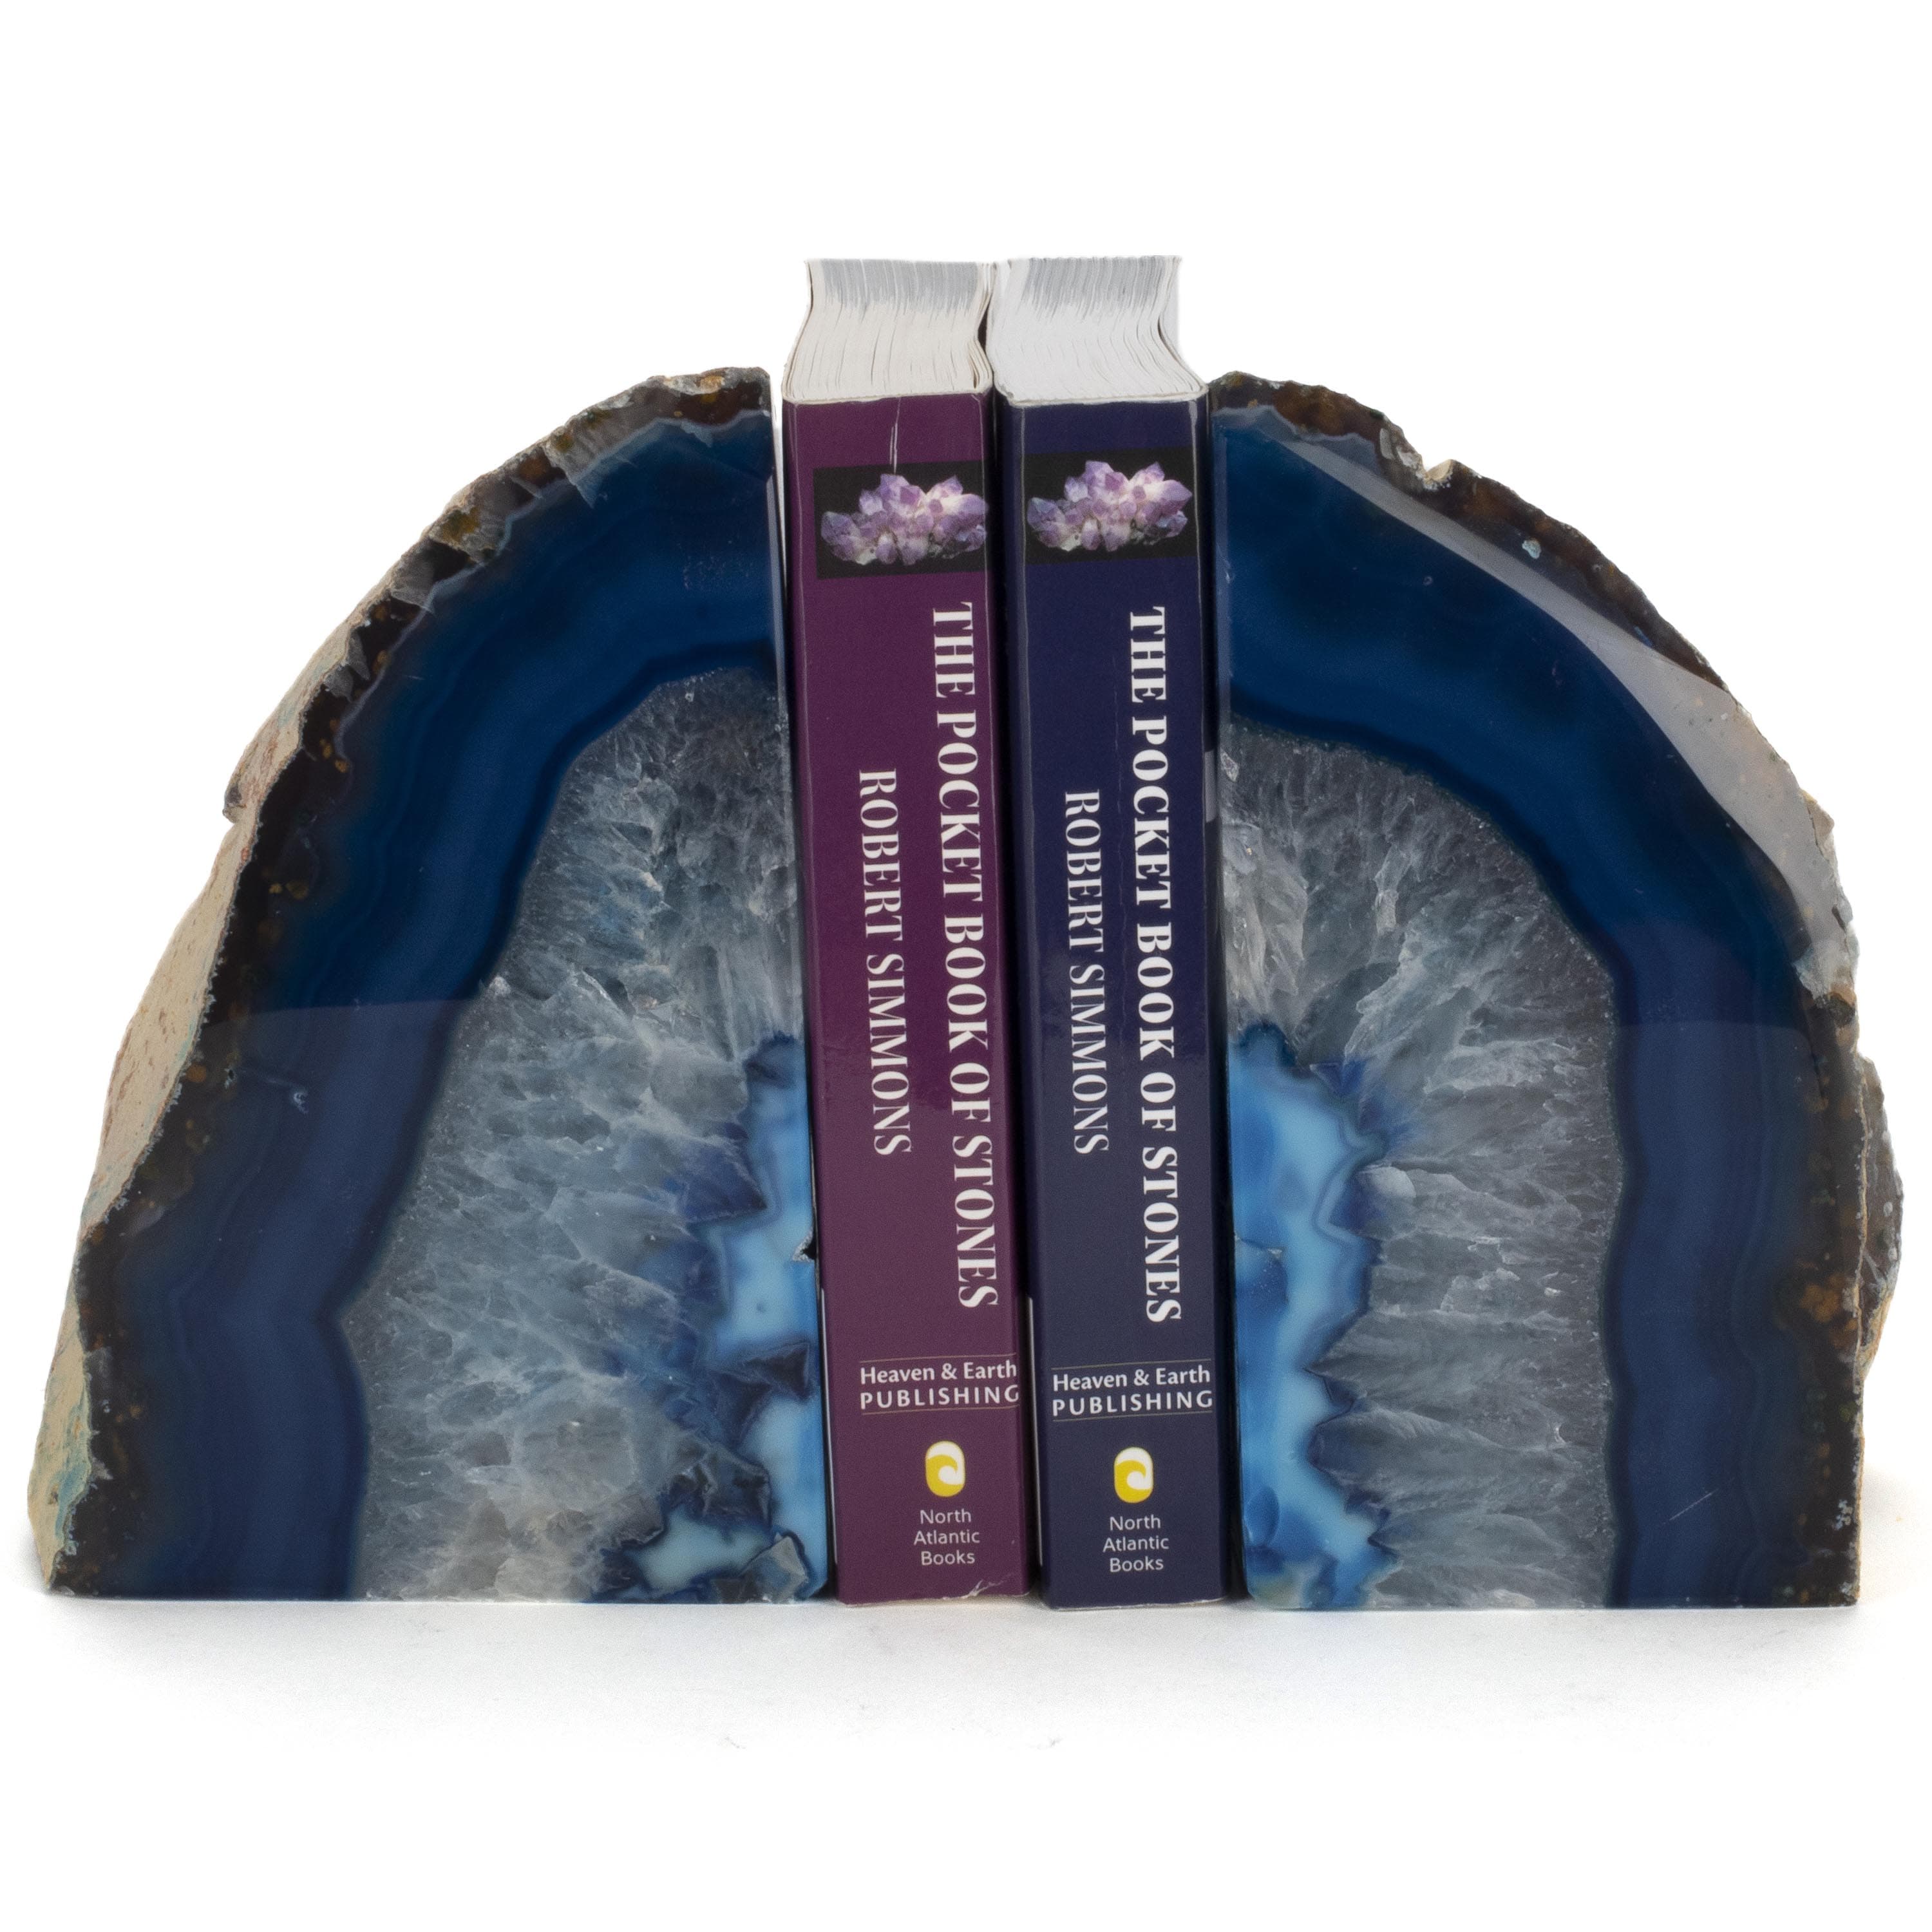 KALIFANO Agate Large Blue Agate Geode Bookend Set BAB400-BE